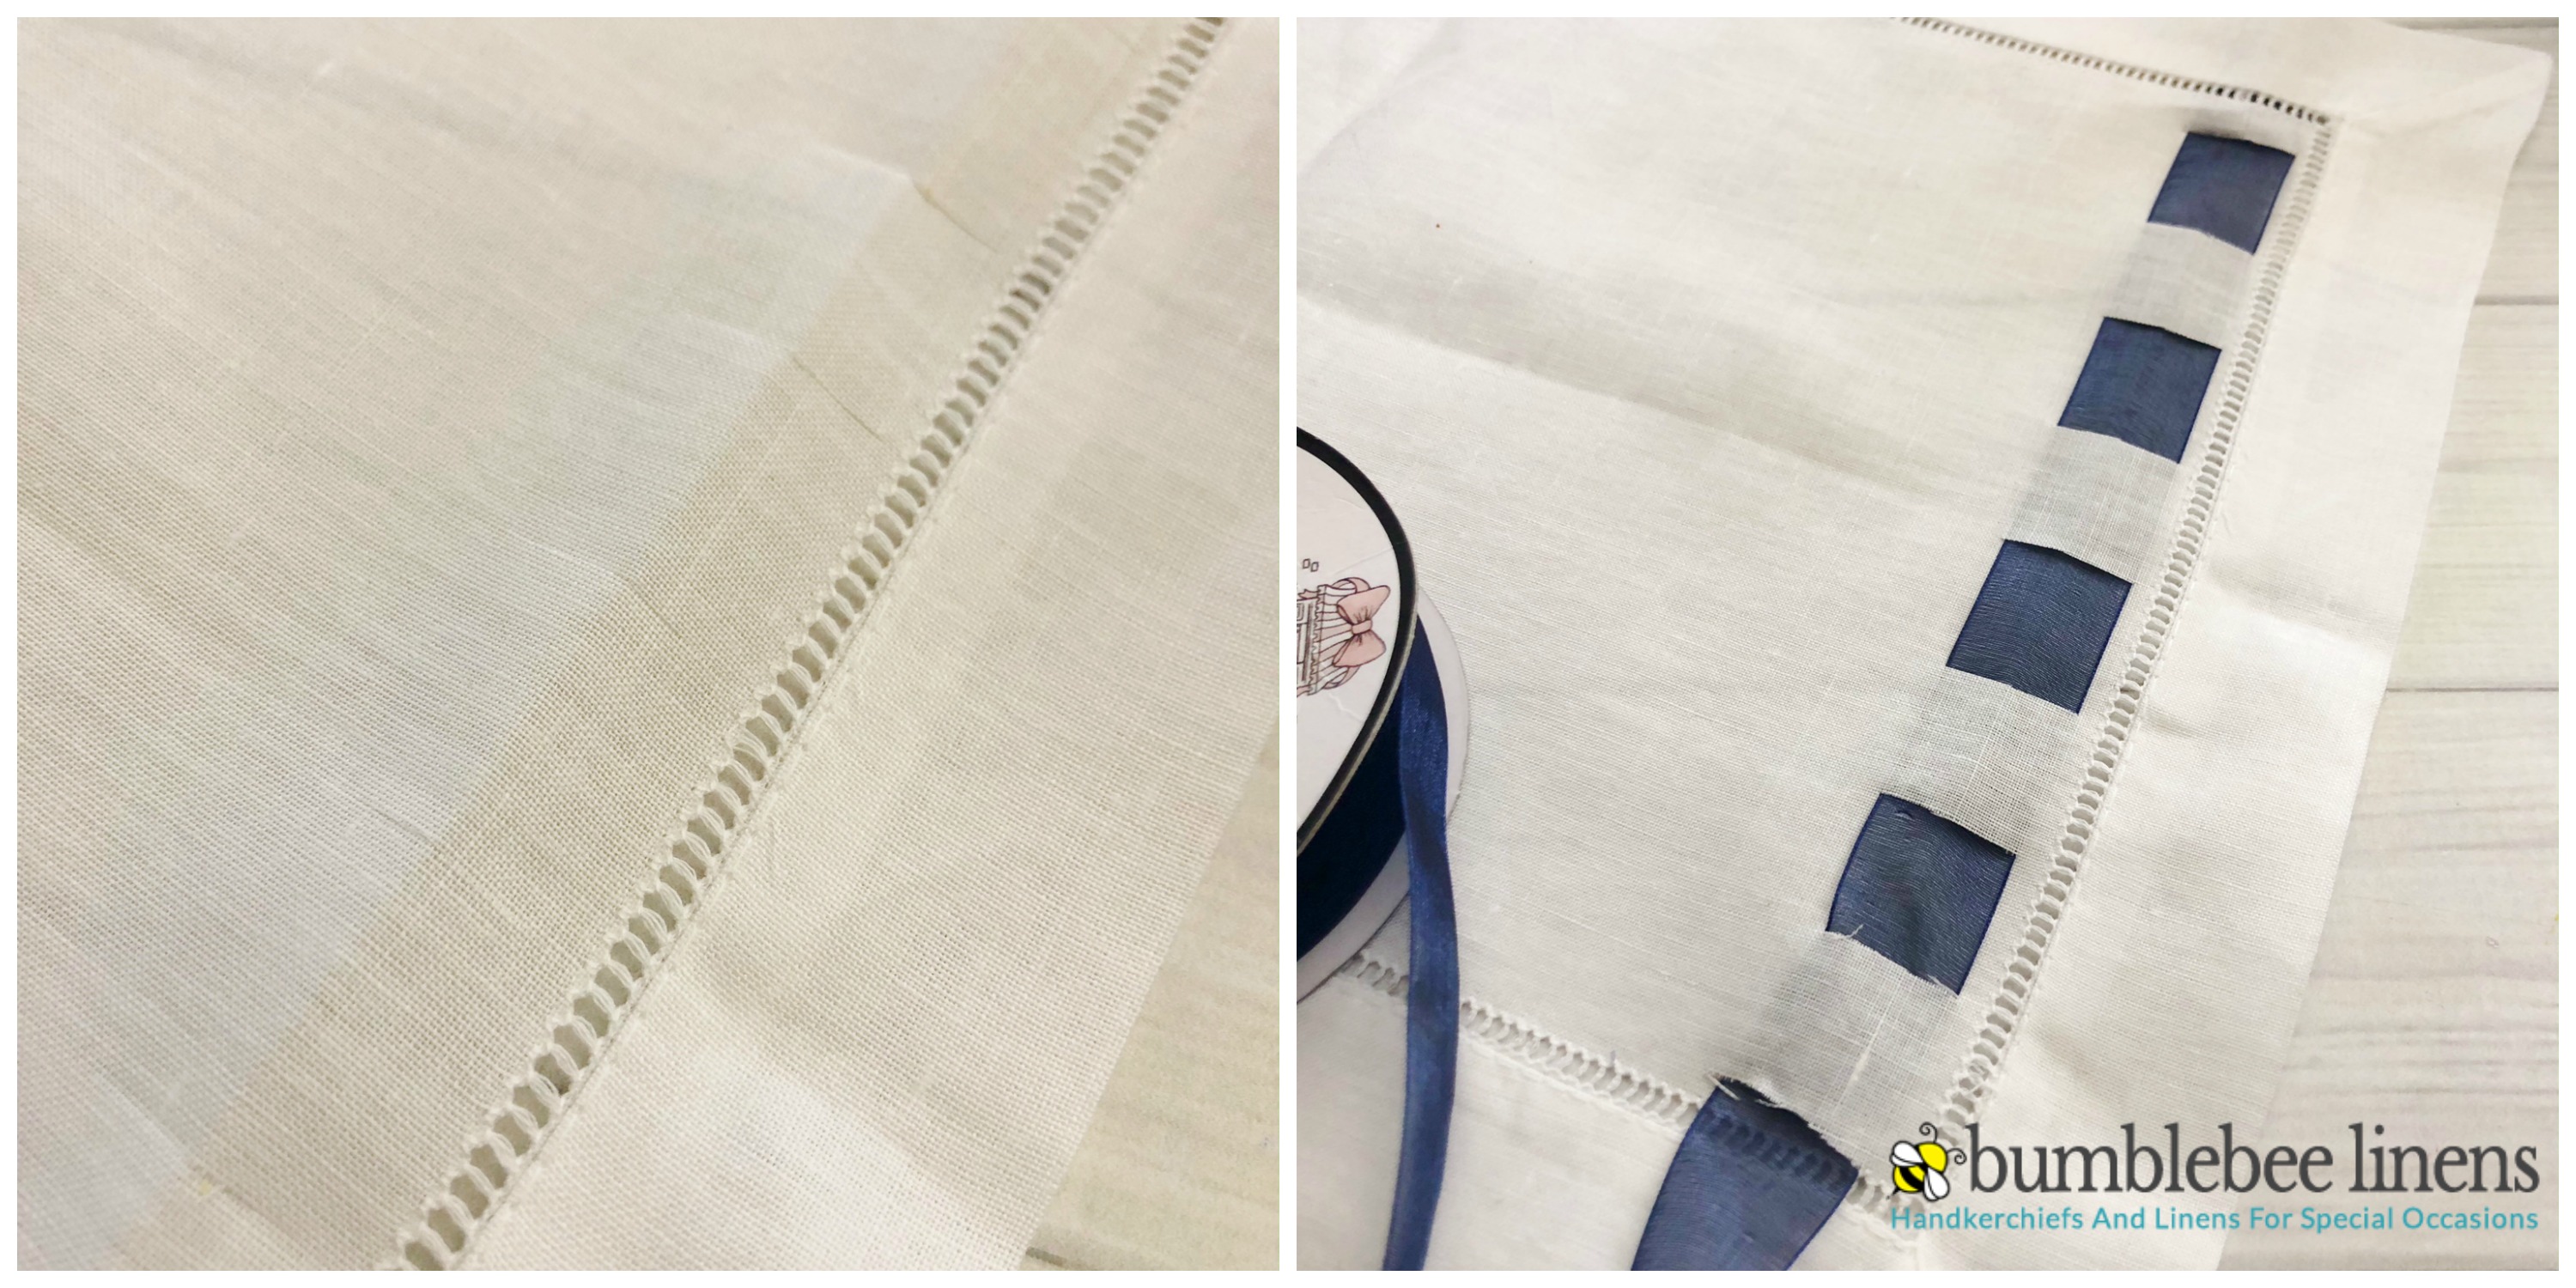  Learn How to Weave Fabric Napkins with just a few materials and a couple easy steps.